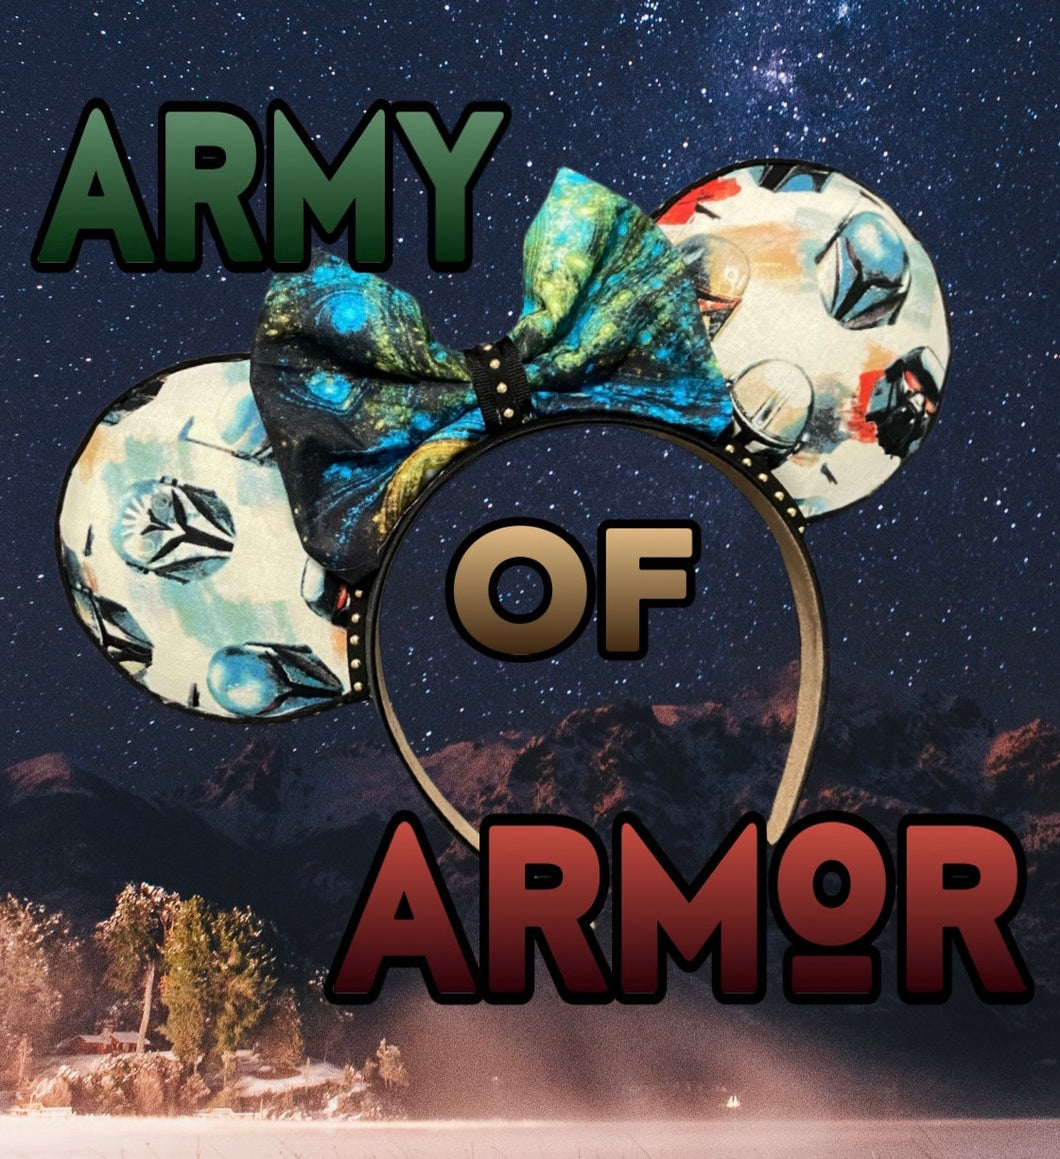 Army of Armor Fabric Mouse Ears